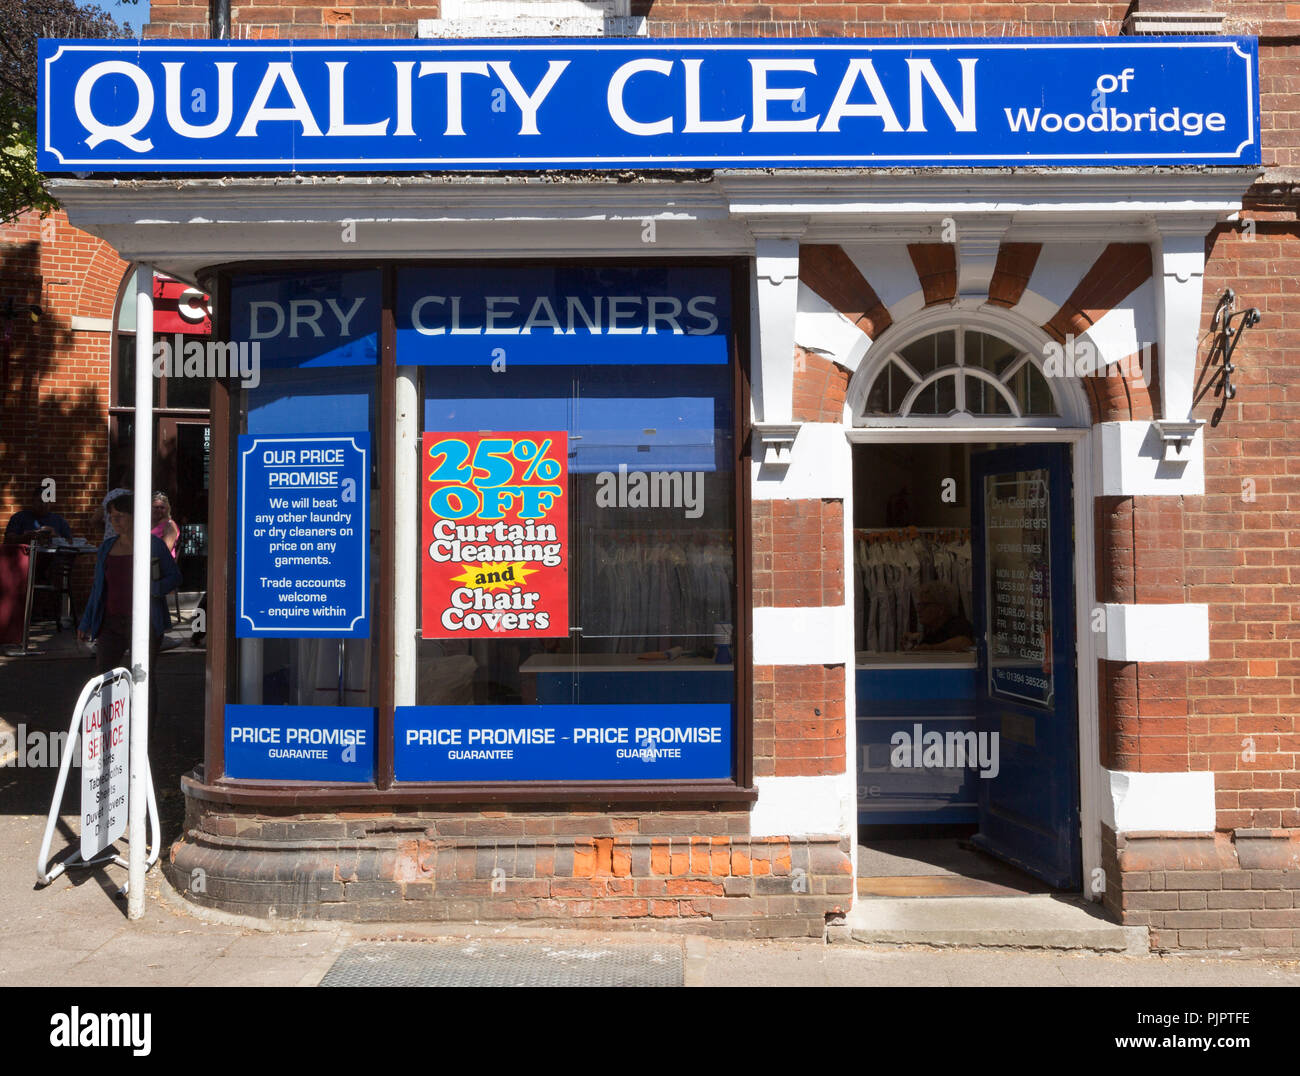 Quality Clean dry cleaners shop, Woodbridge, Suffolk, England, UK Stock Photo